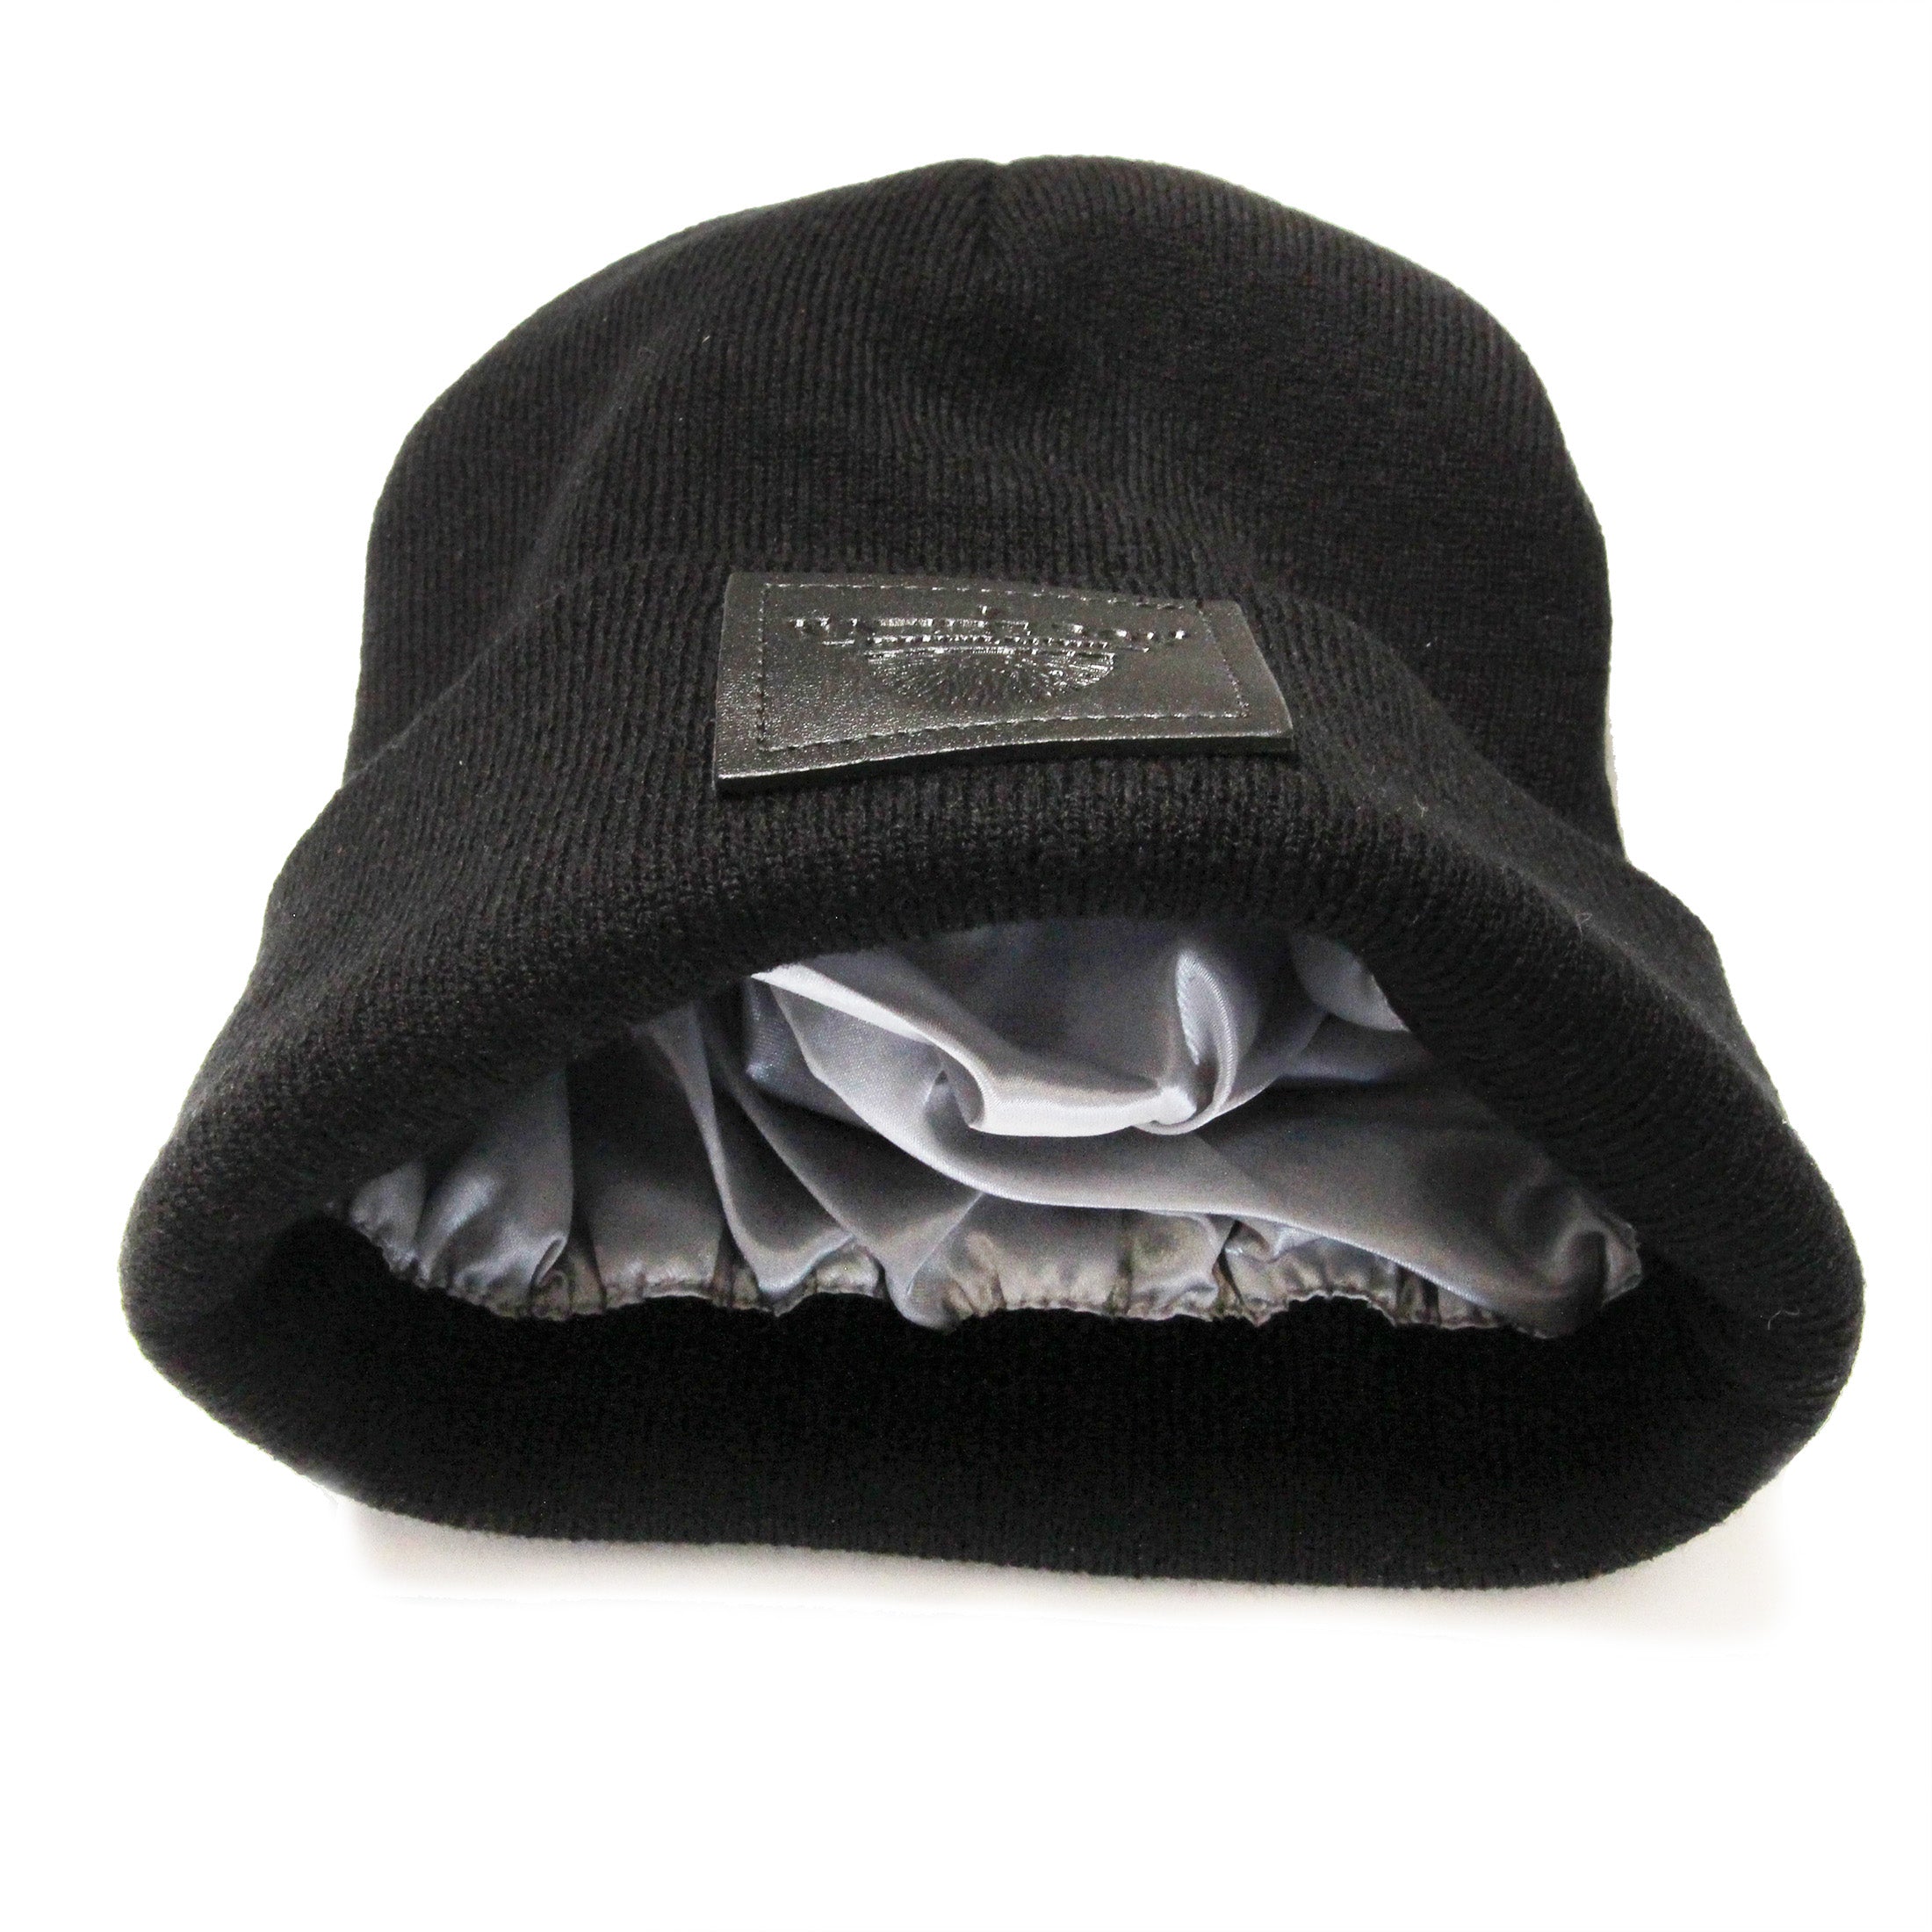 NATURE BOY All Black Satin-Lined Beanie